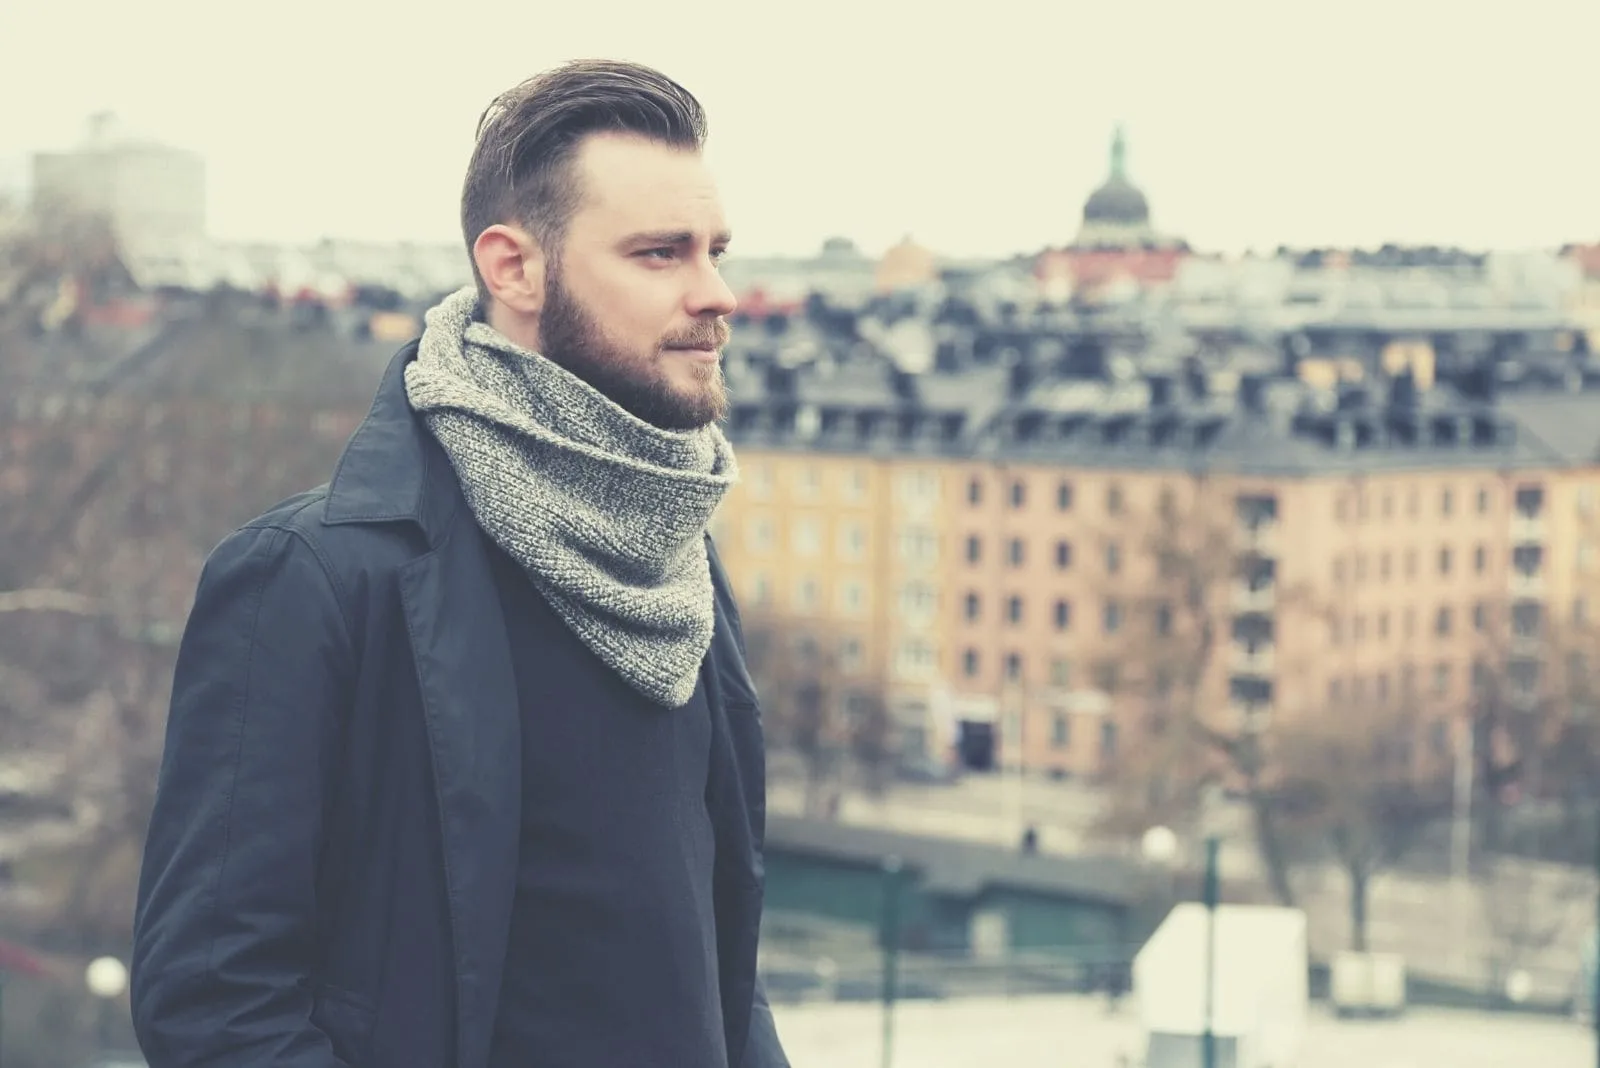 lonely pensive man with a grey scarf standing with the city behind